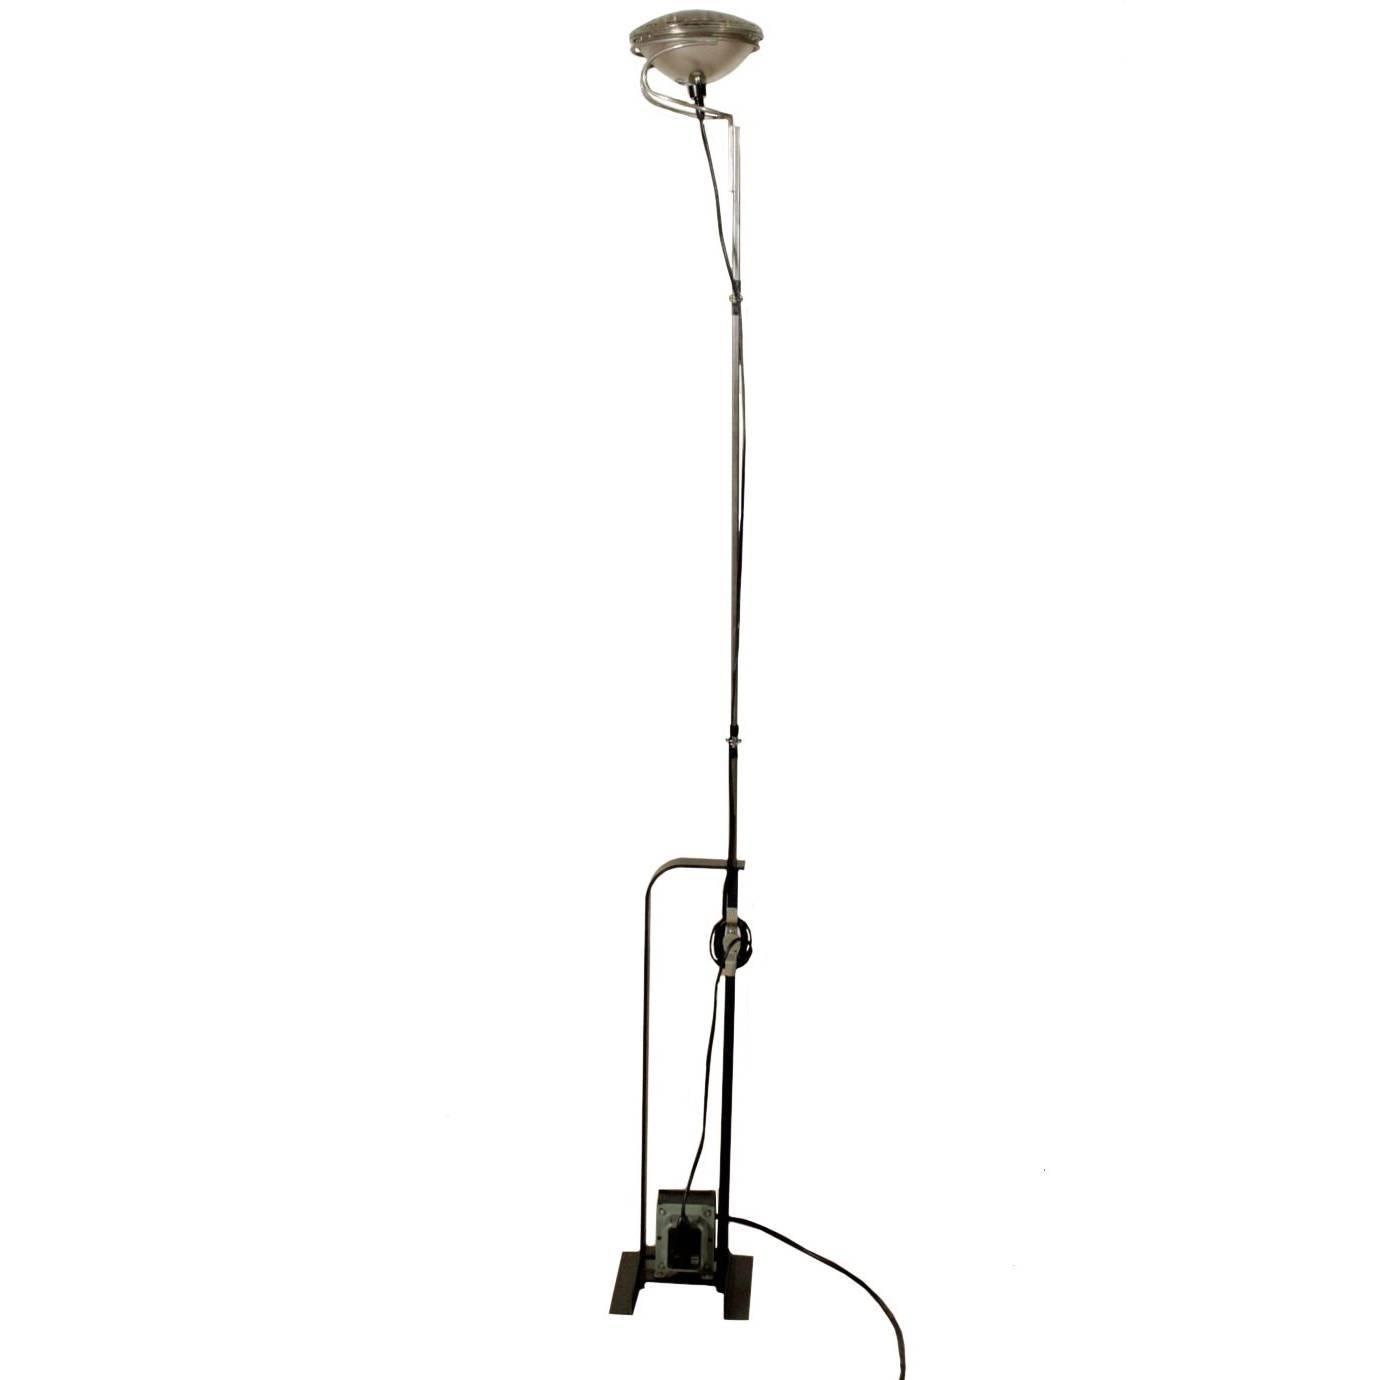 'Toio' Floor Lamp by Castiglioni Brothers for Flos Steel Lacquered Metal, 1962